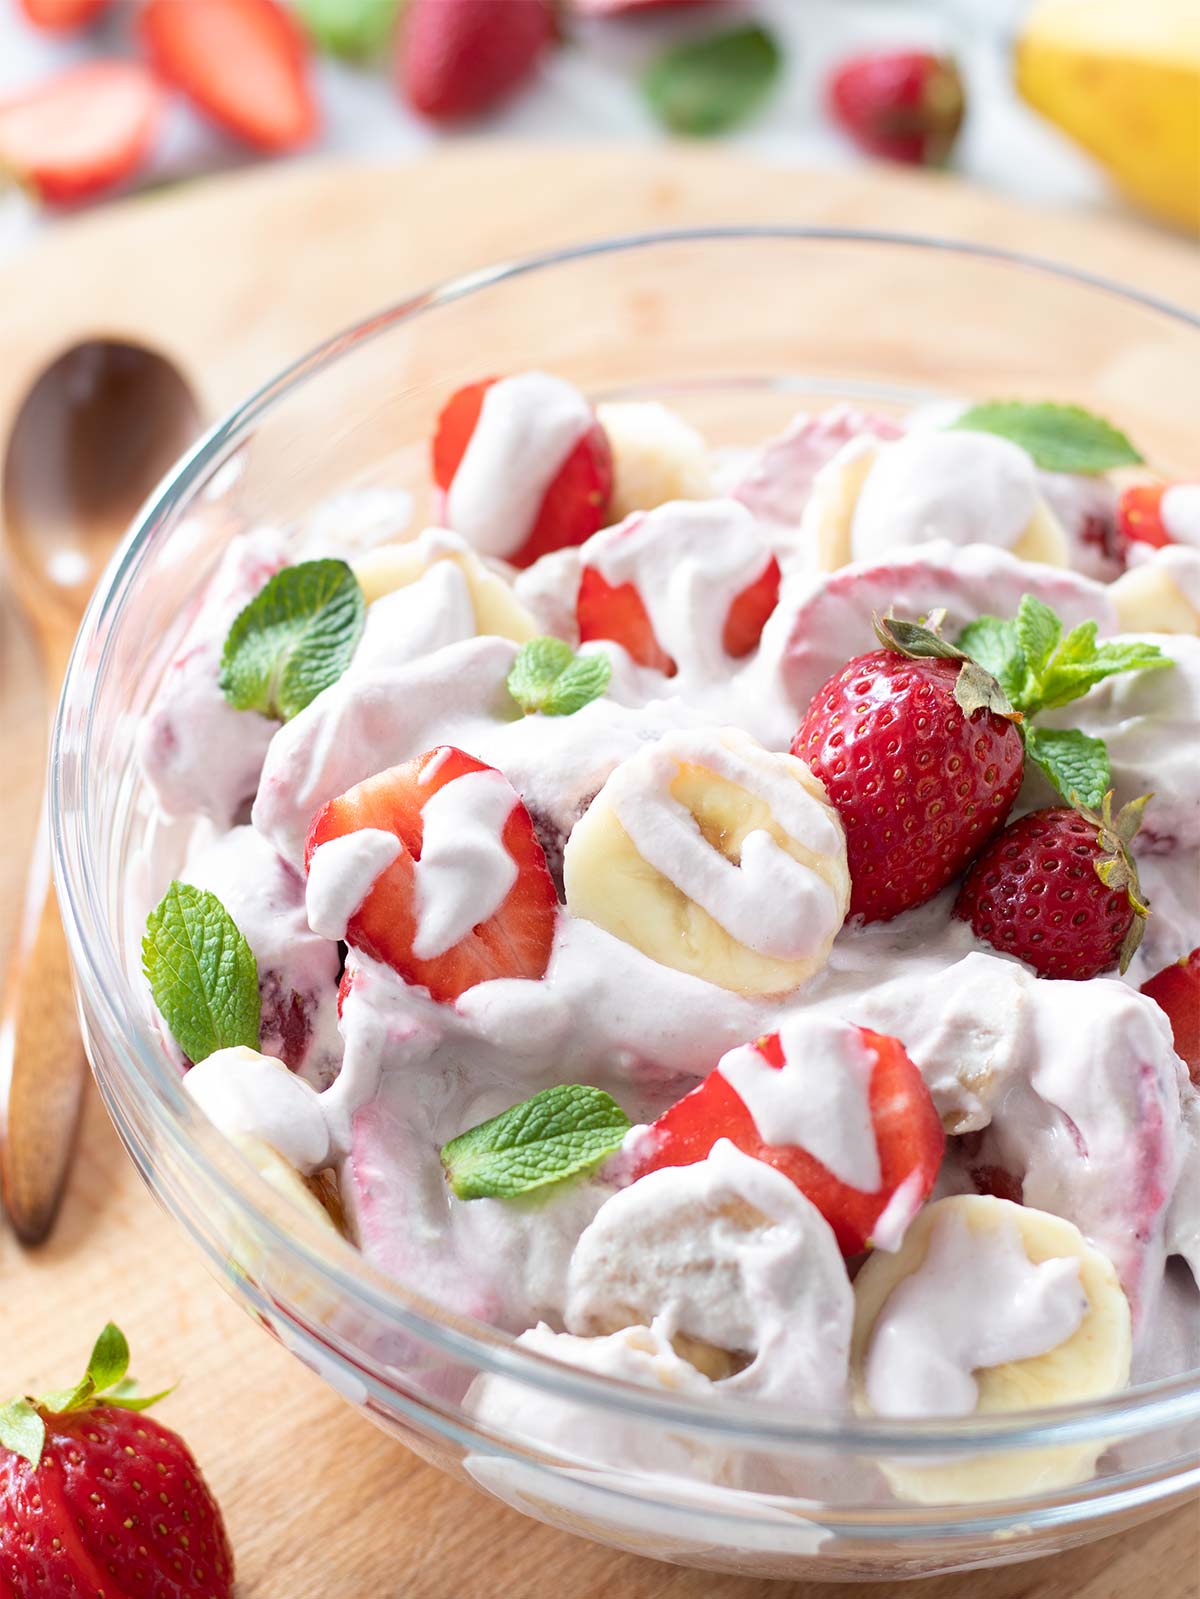 Dessert salad with creamy cheesecake dressing in a bowl with wooden spoon and fresh strawberries and banana in the background